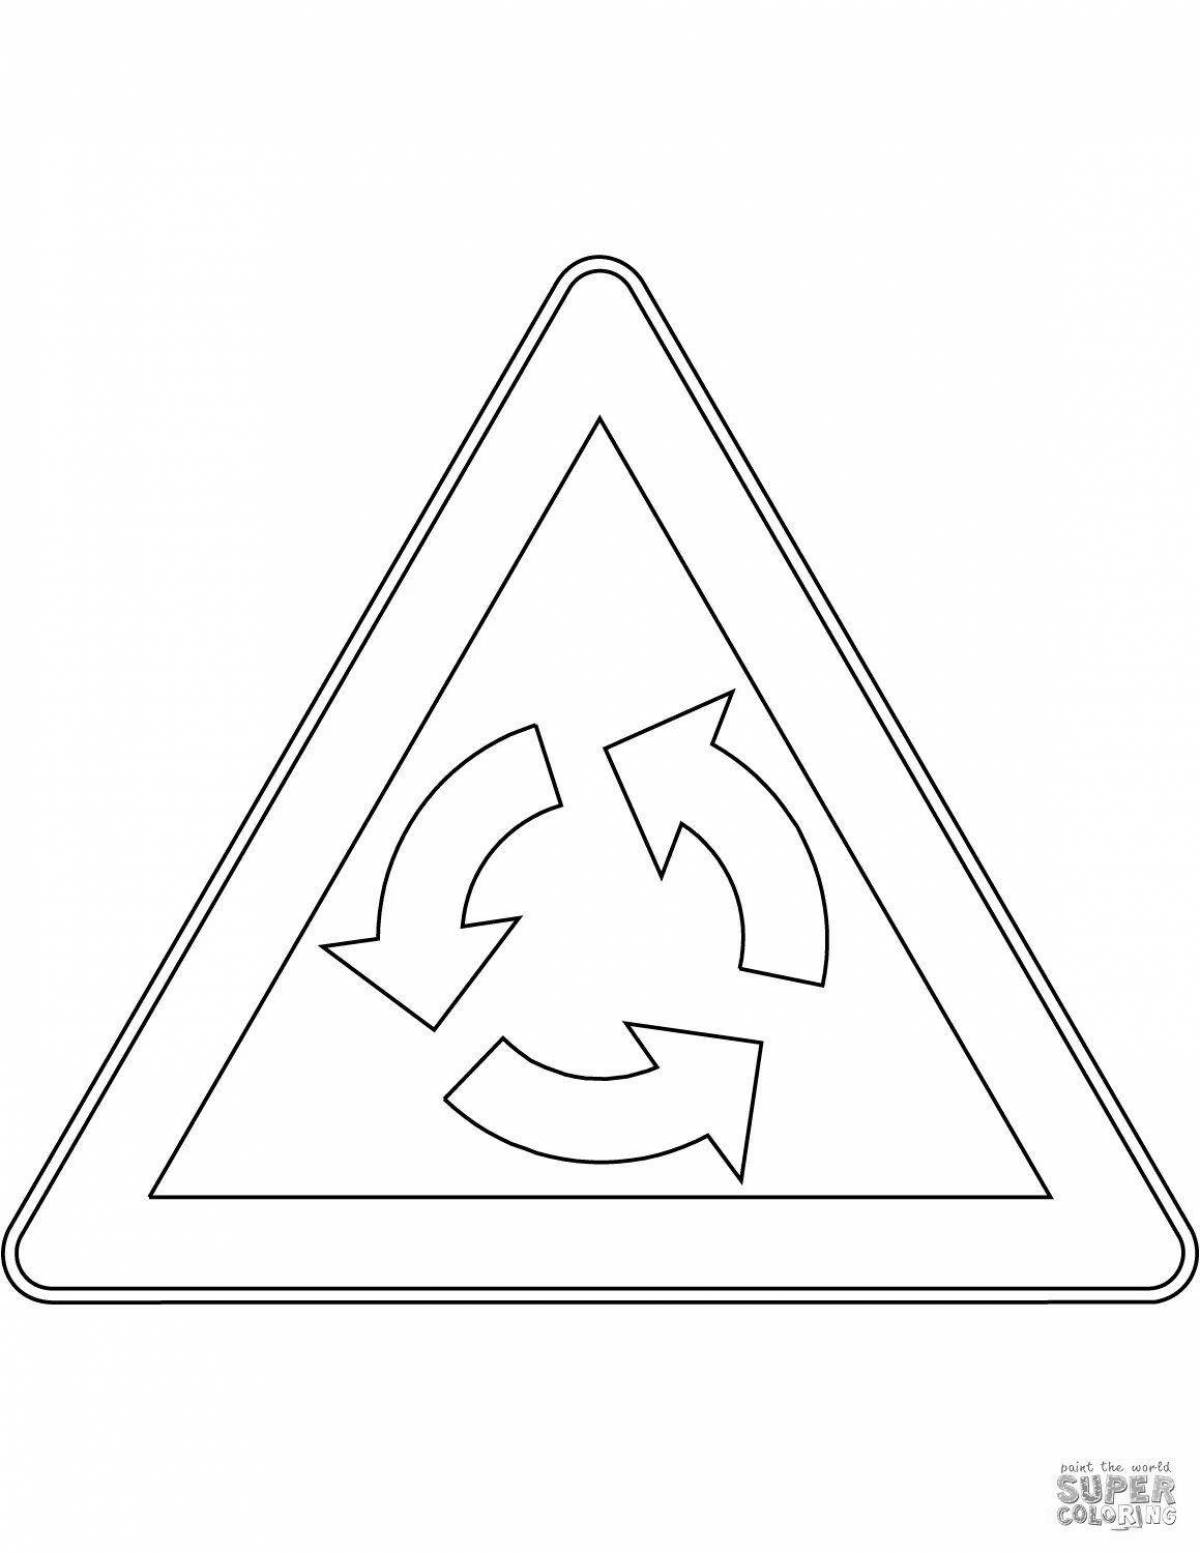 Colorful road signs coloring pages for kids